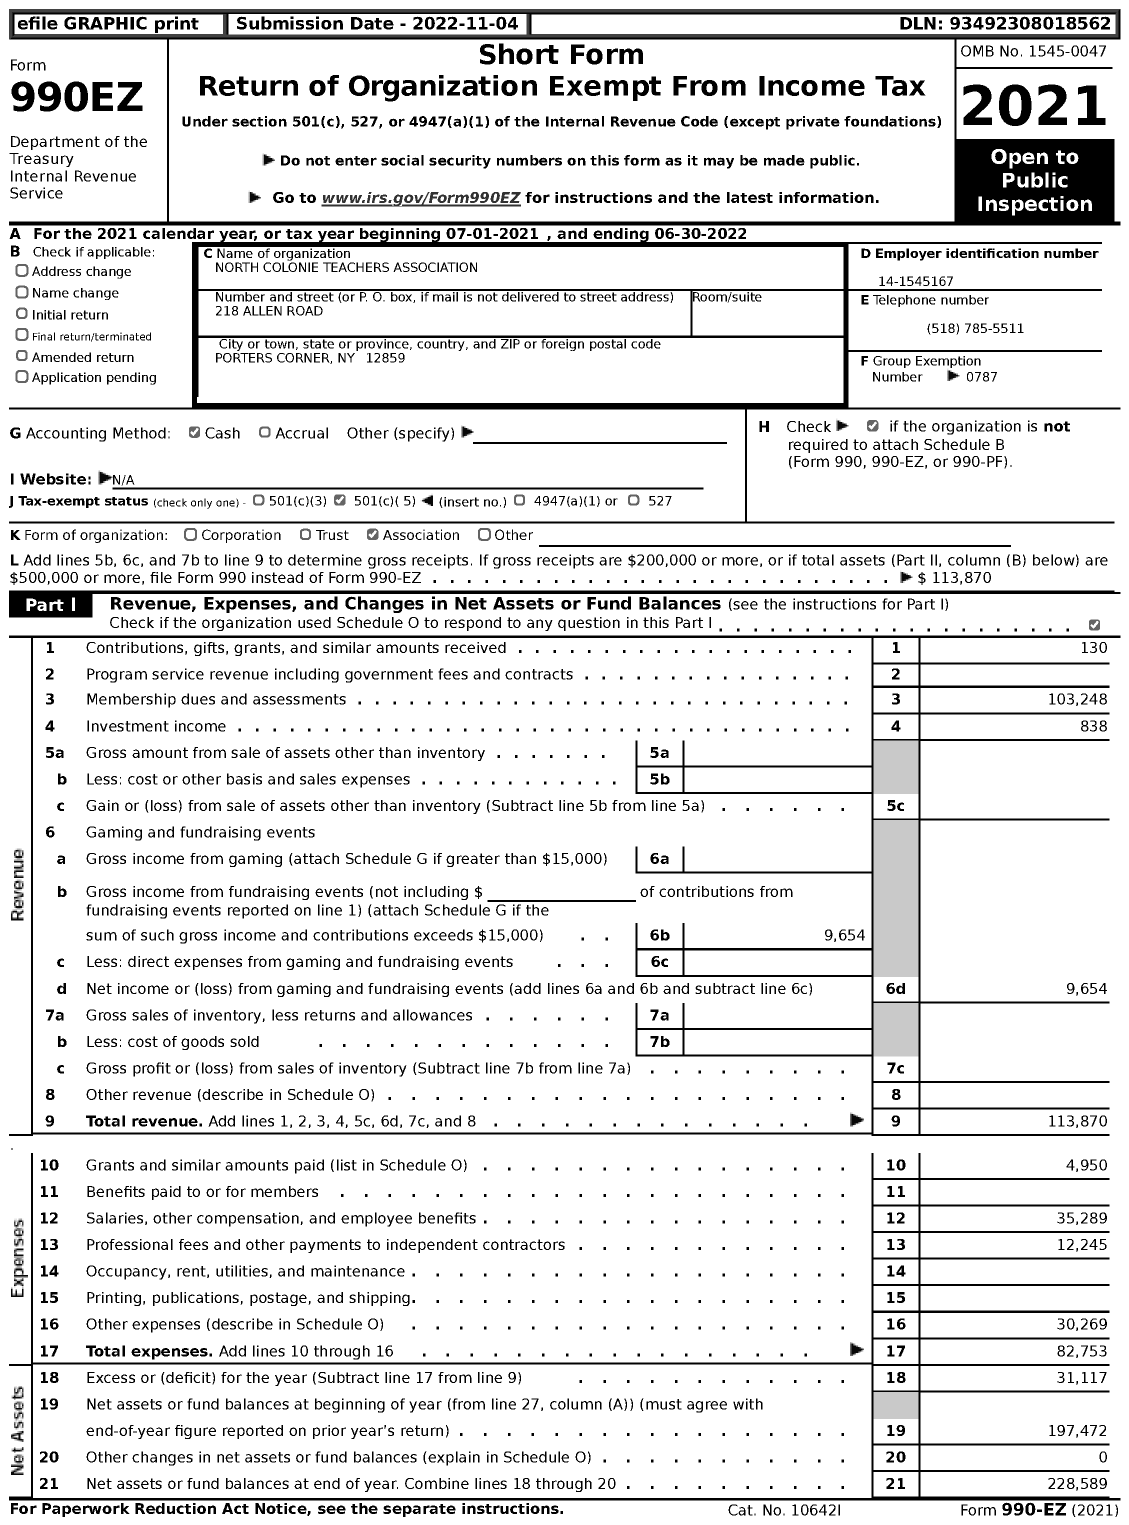 Image of first page of 2021 Form 990EZ for American Federation of Teachers - 2875 North Colonie Teachers Associa